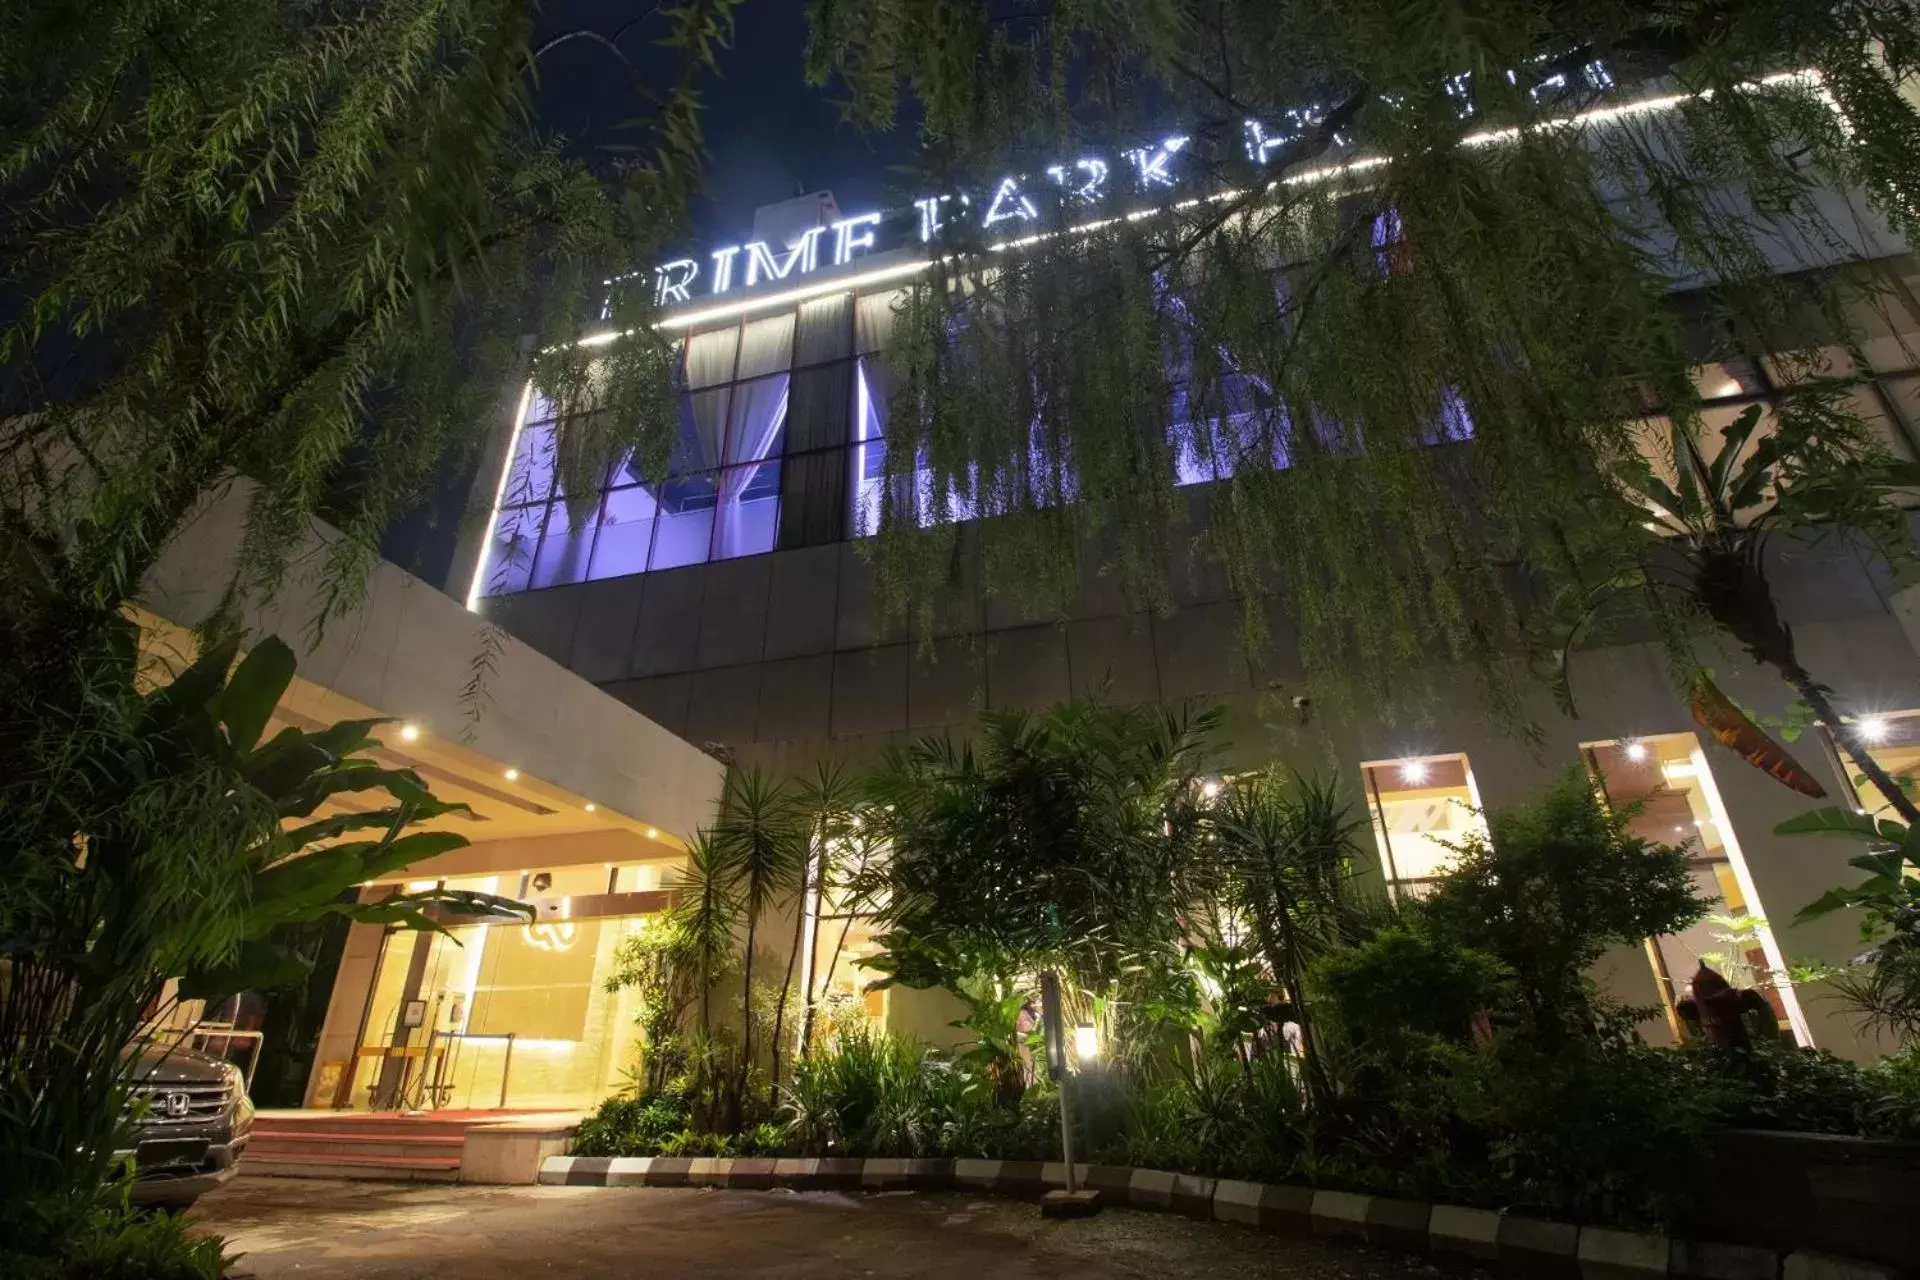 Property Building in PRIME PARK Hotel Bandung